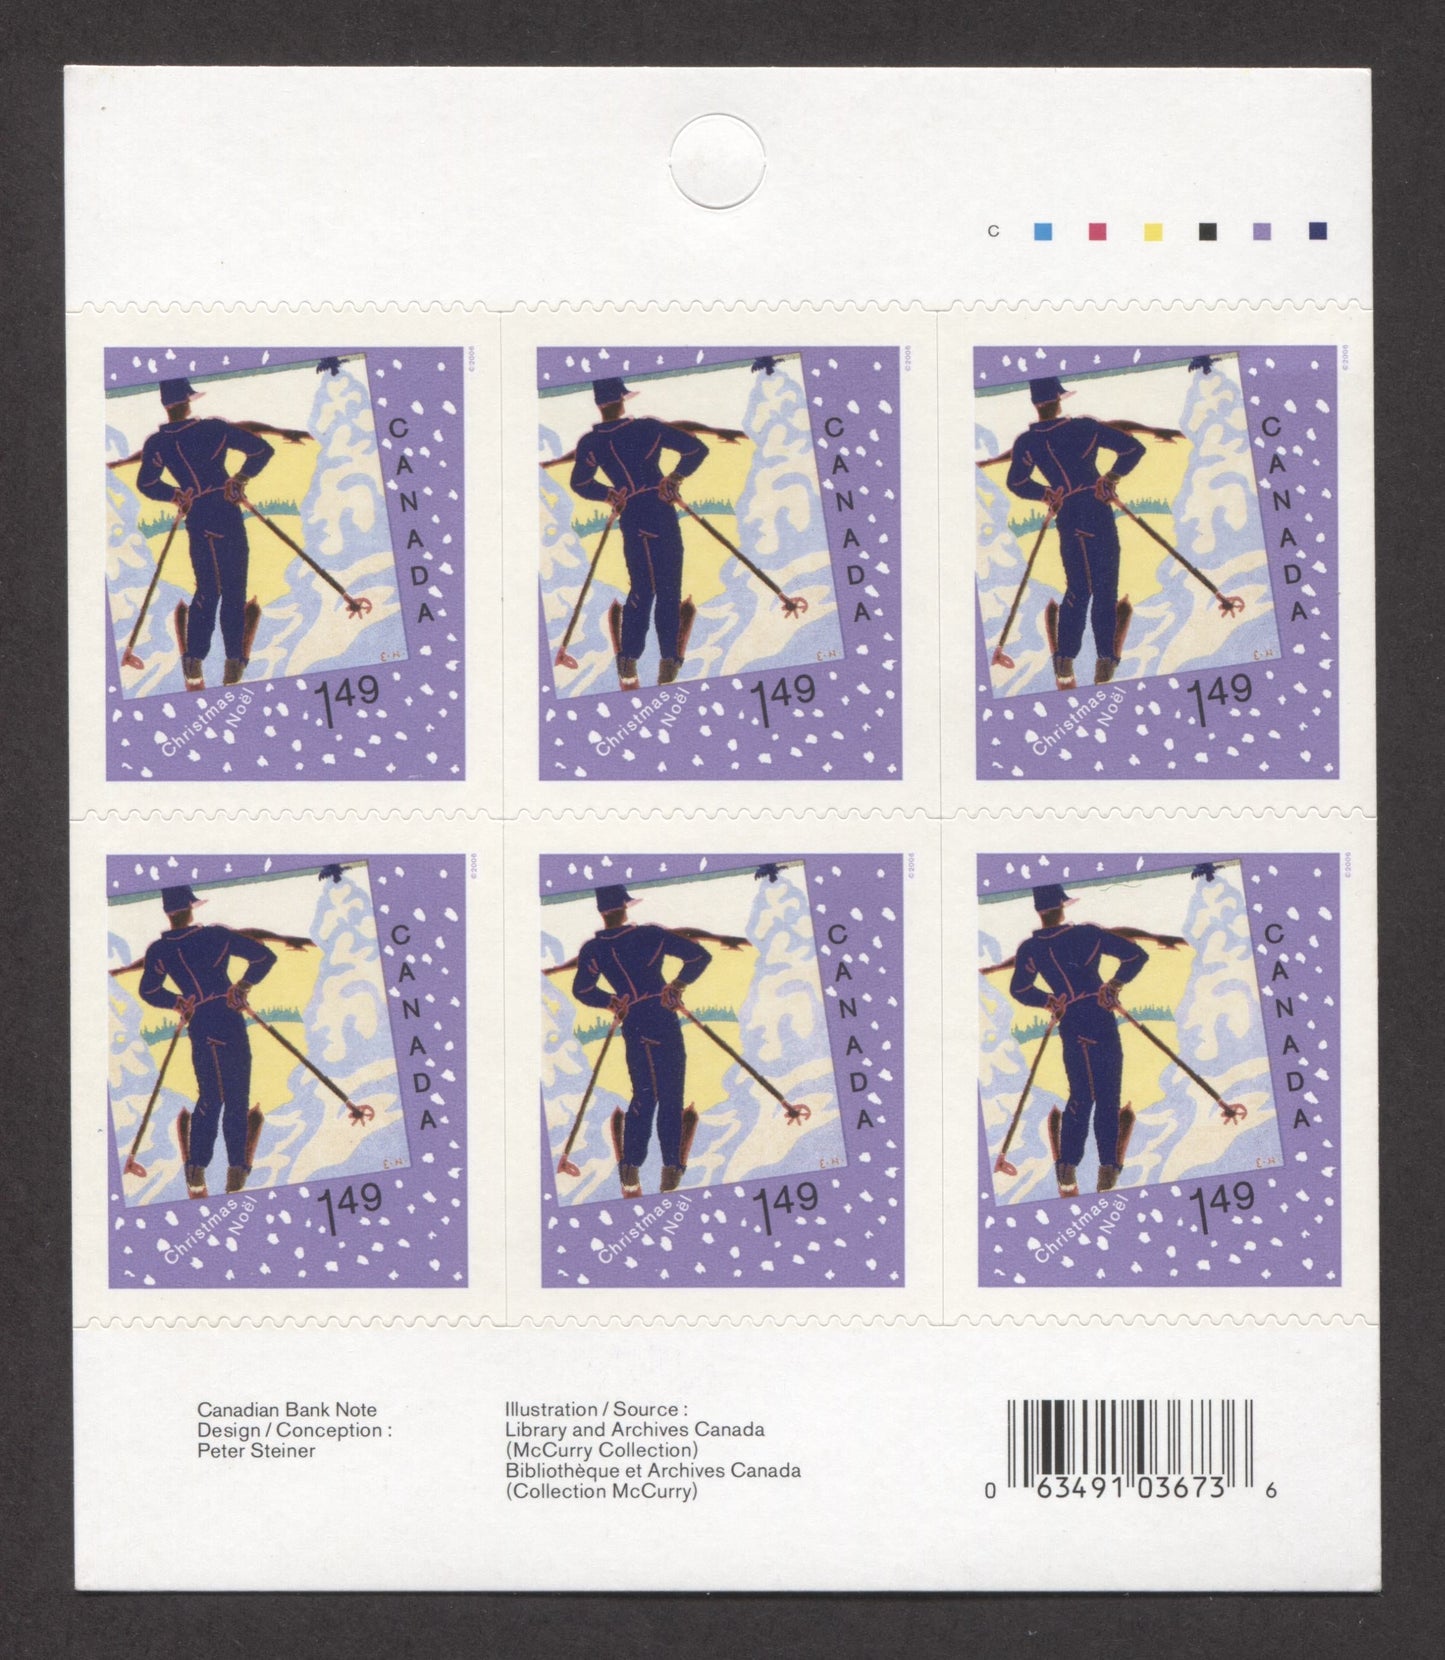 Canada #BK339 2006 Christmas Issue, Complete $8.94 Booklet, Tullis Russell Coatings Paper, Dead Paper, 4 mm GT-4 Tagging